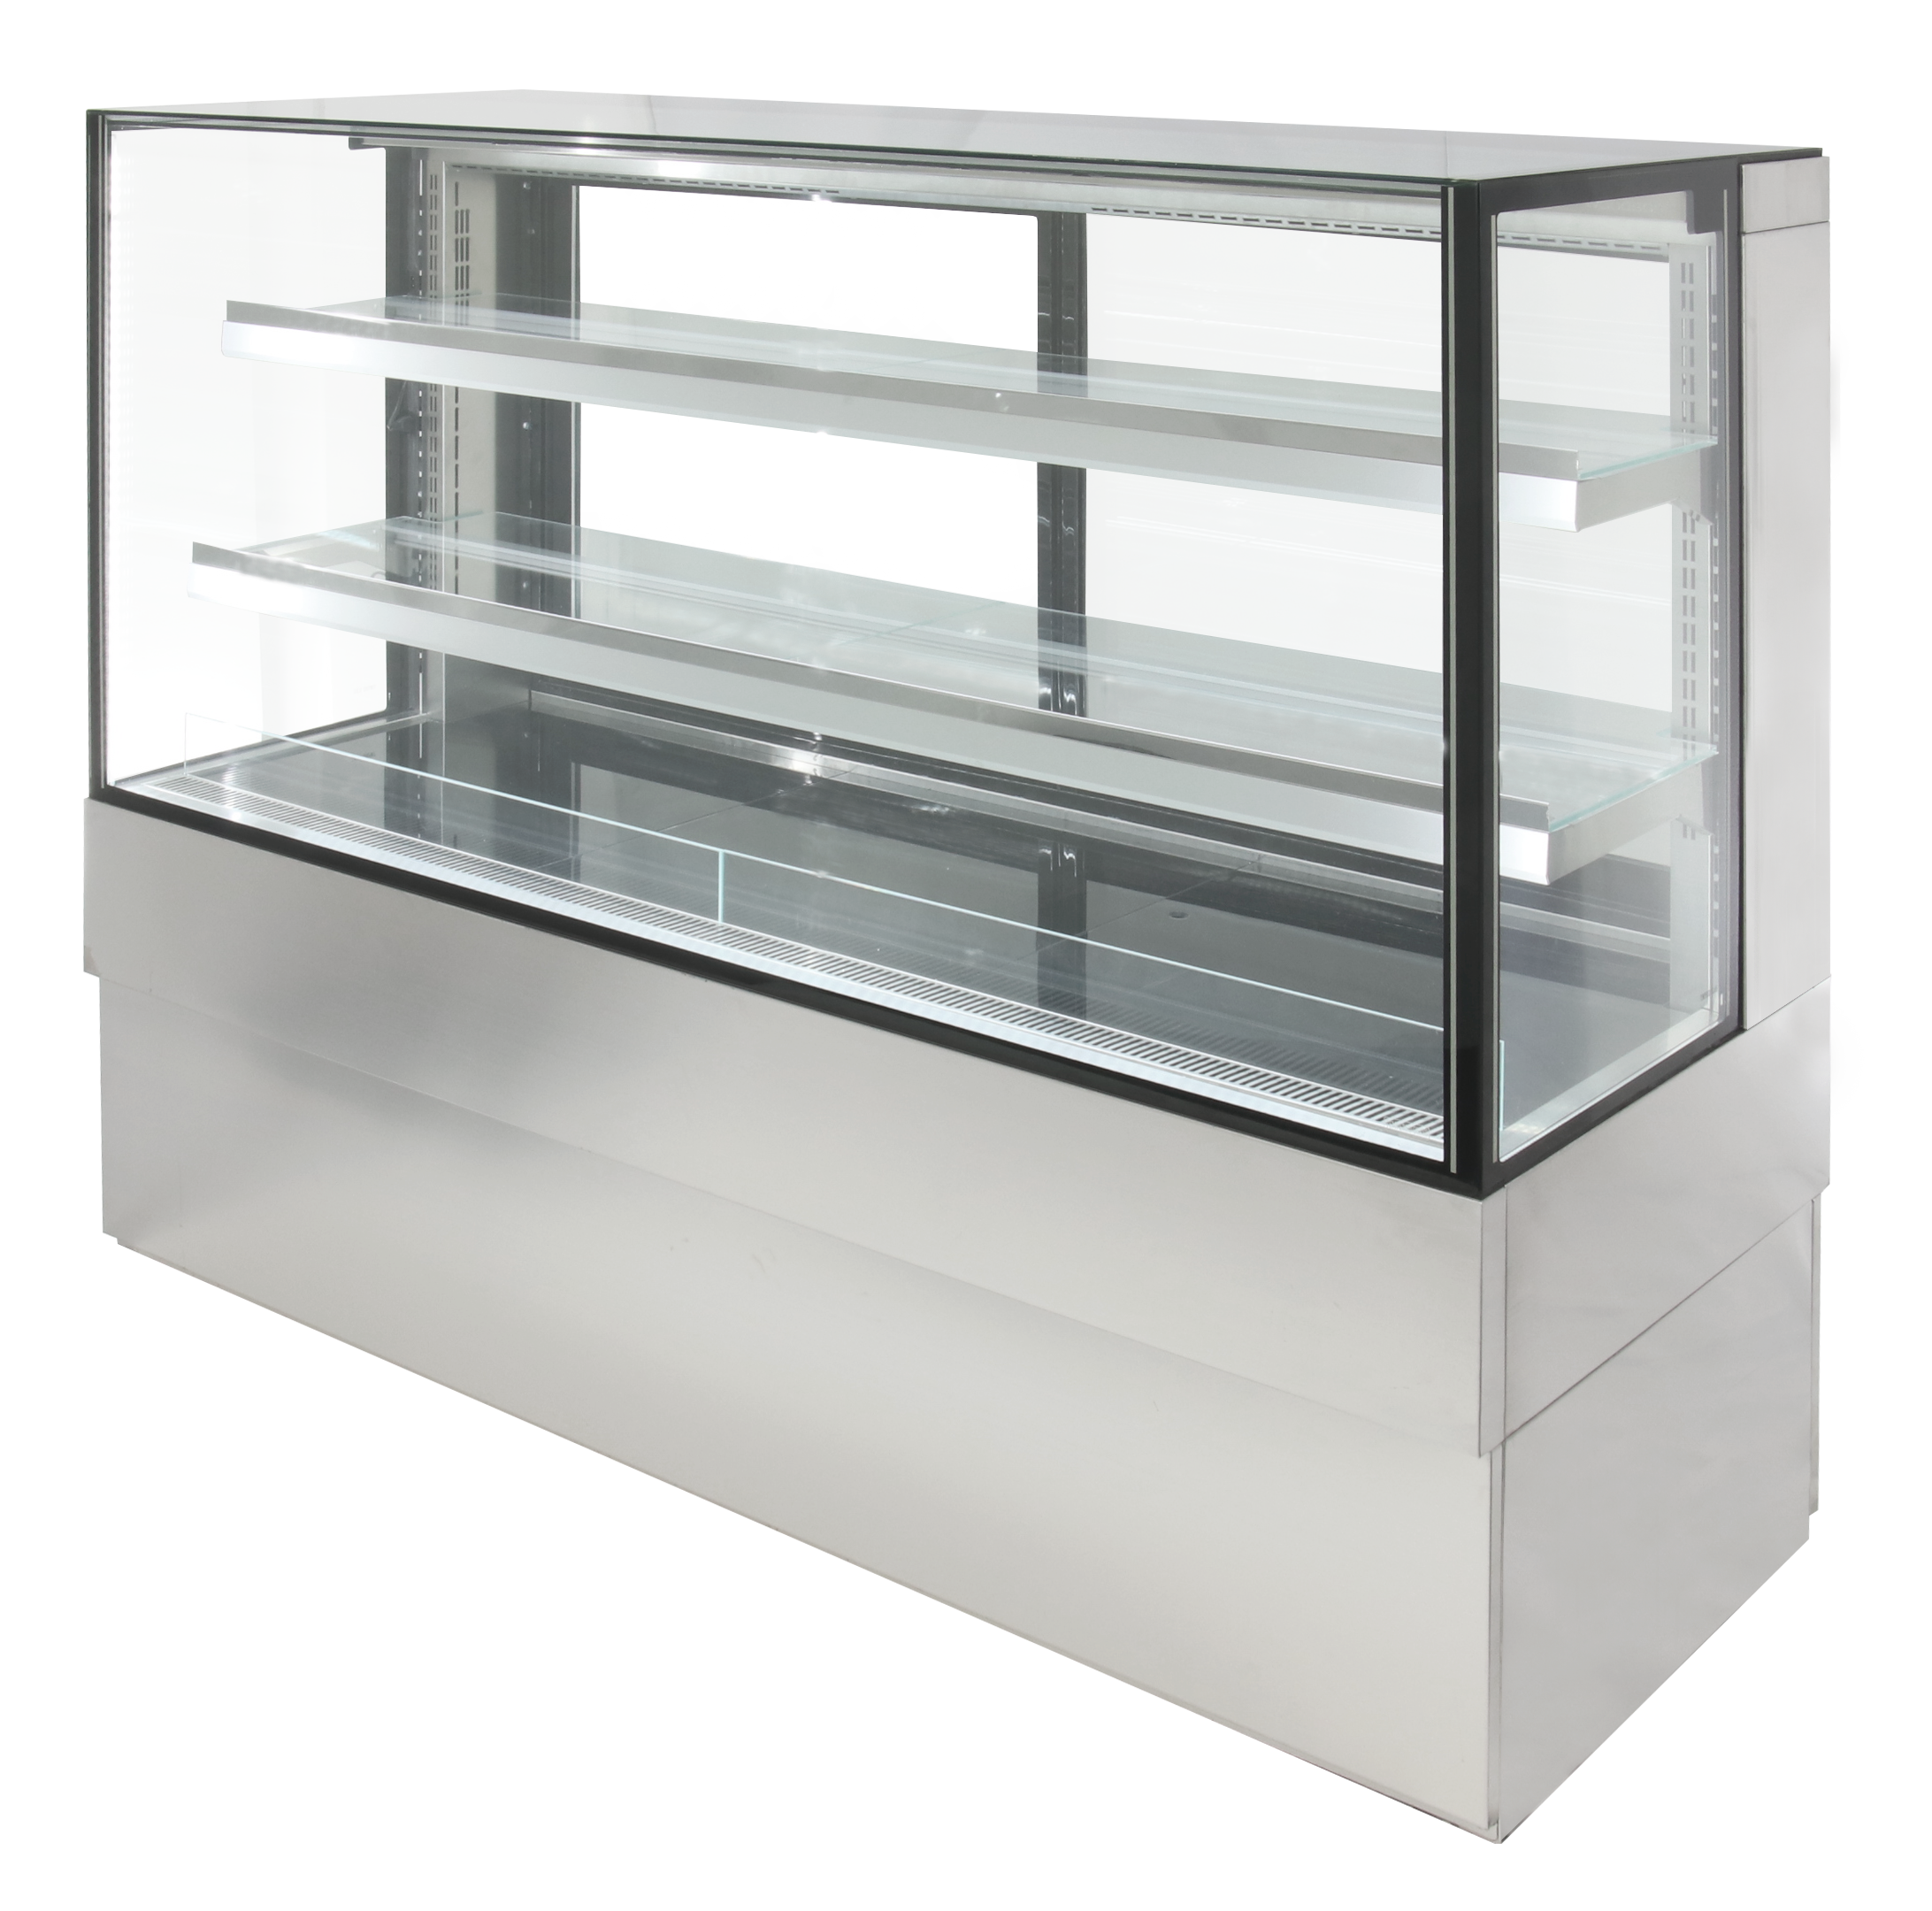 Airex Freestanding Refrigerated Square Food Display AXR.FDFSSQ.15